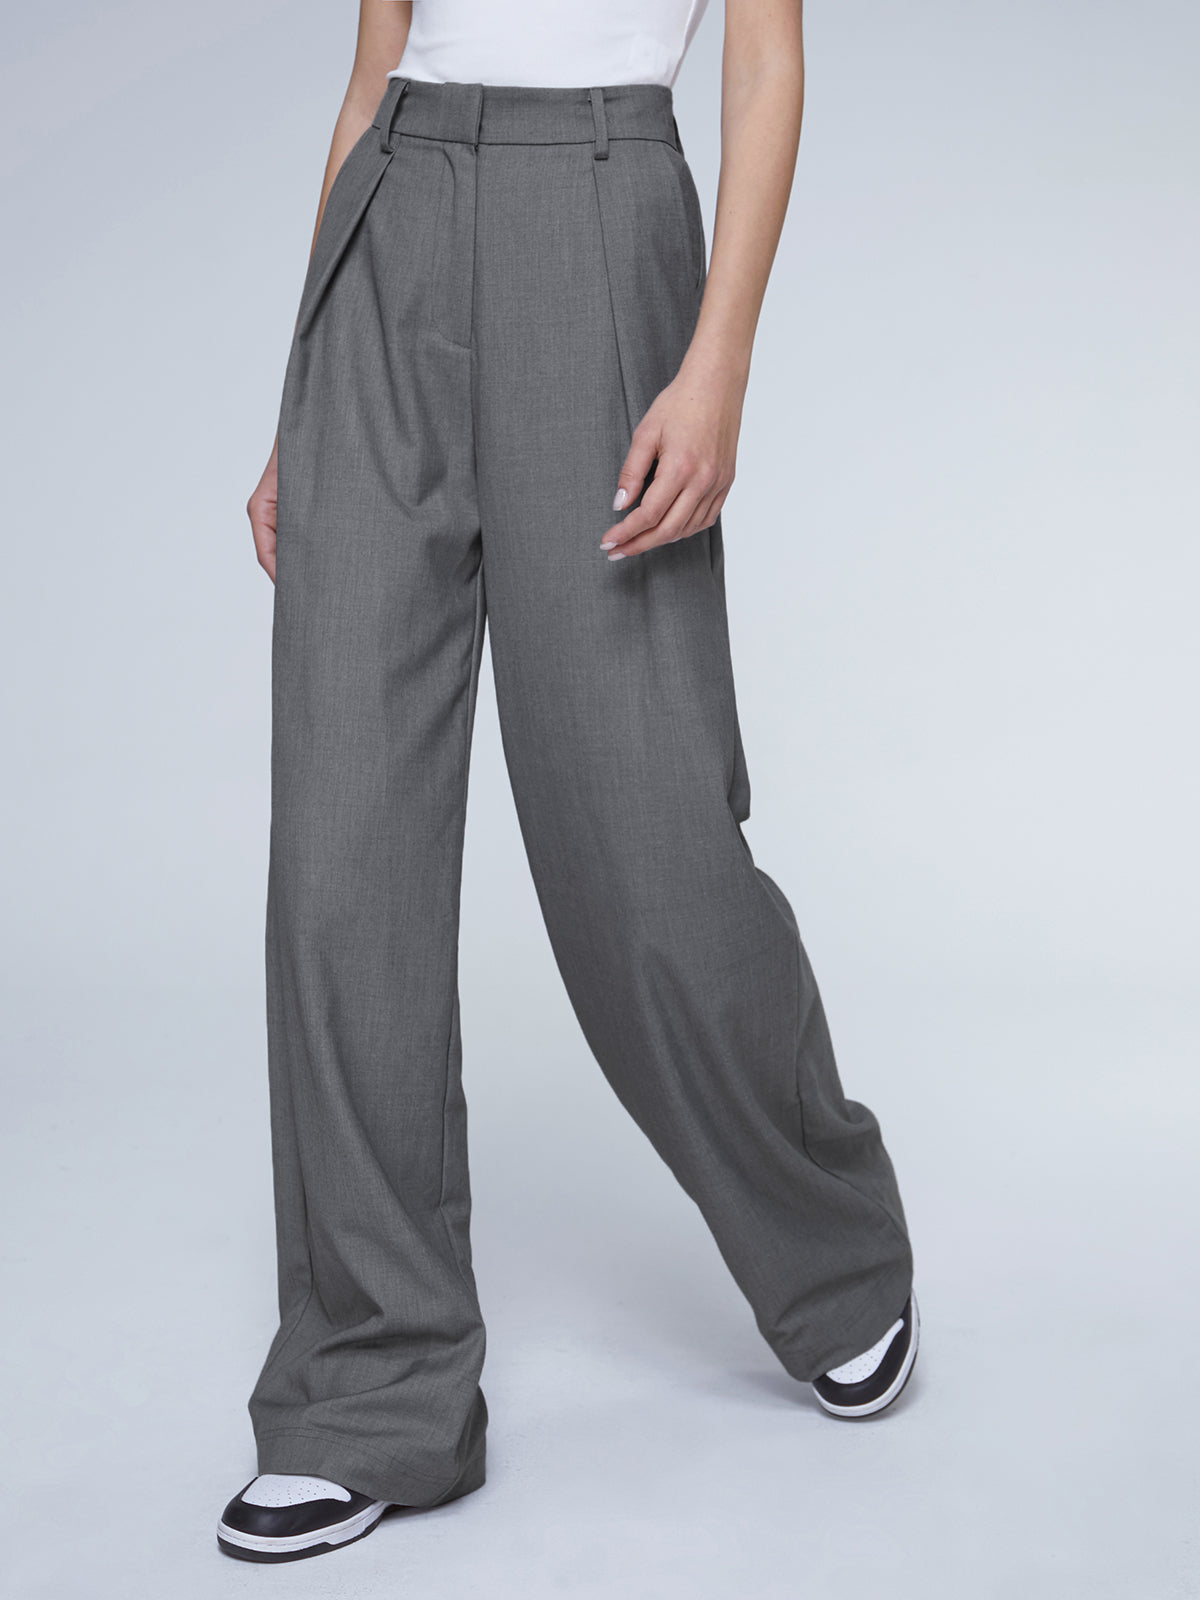 Oversized High Waisted Pleat Front Trousers